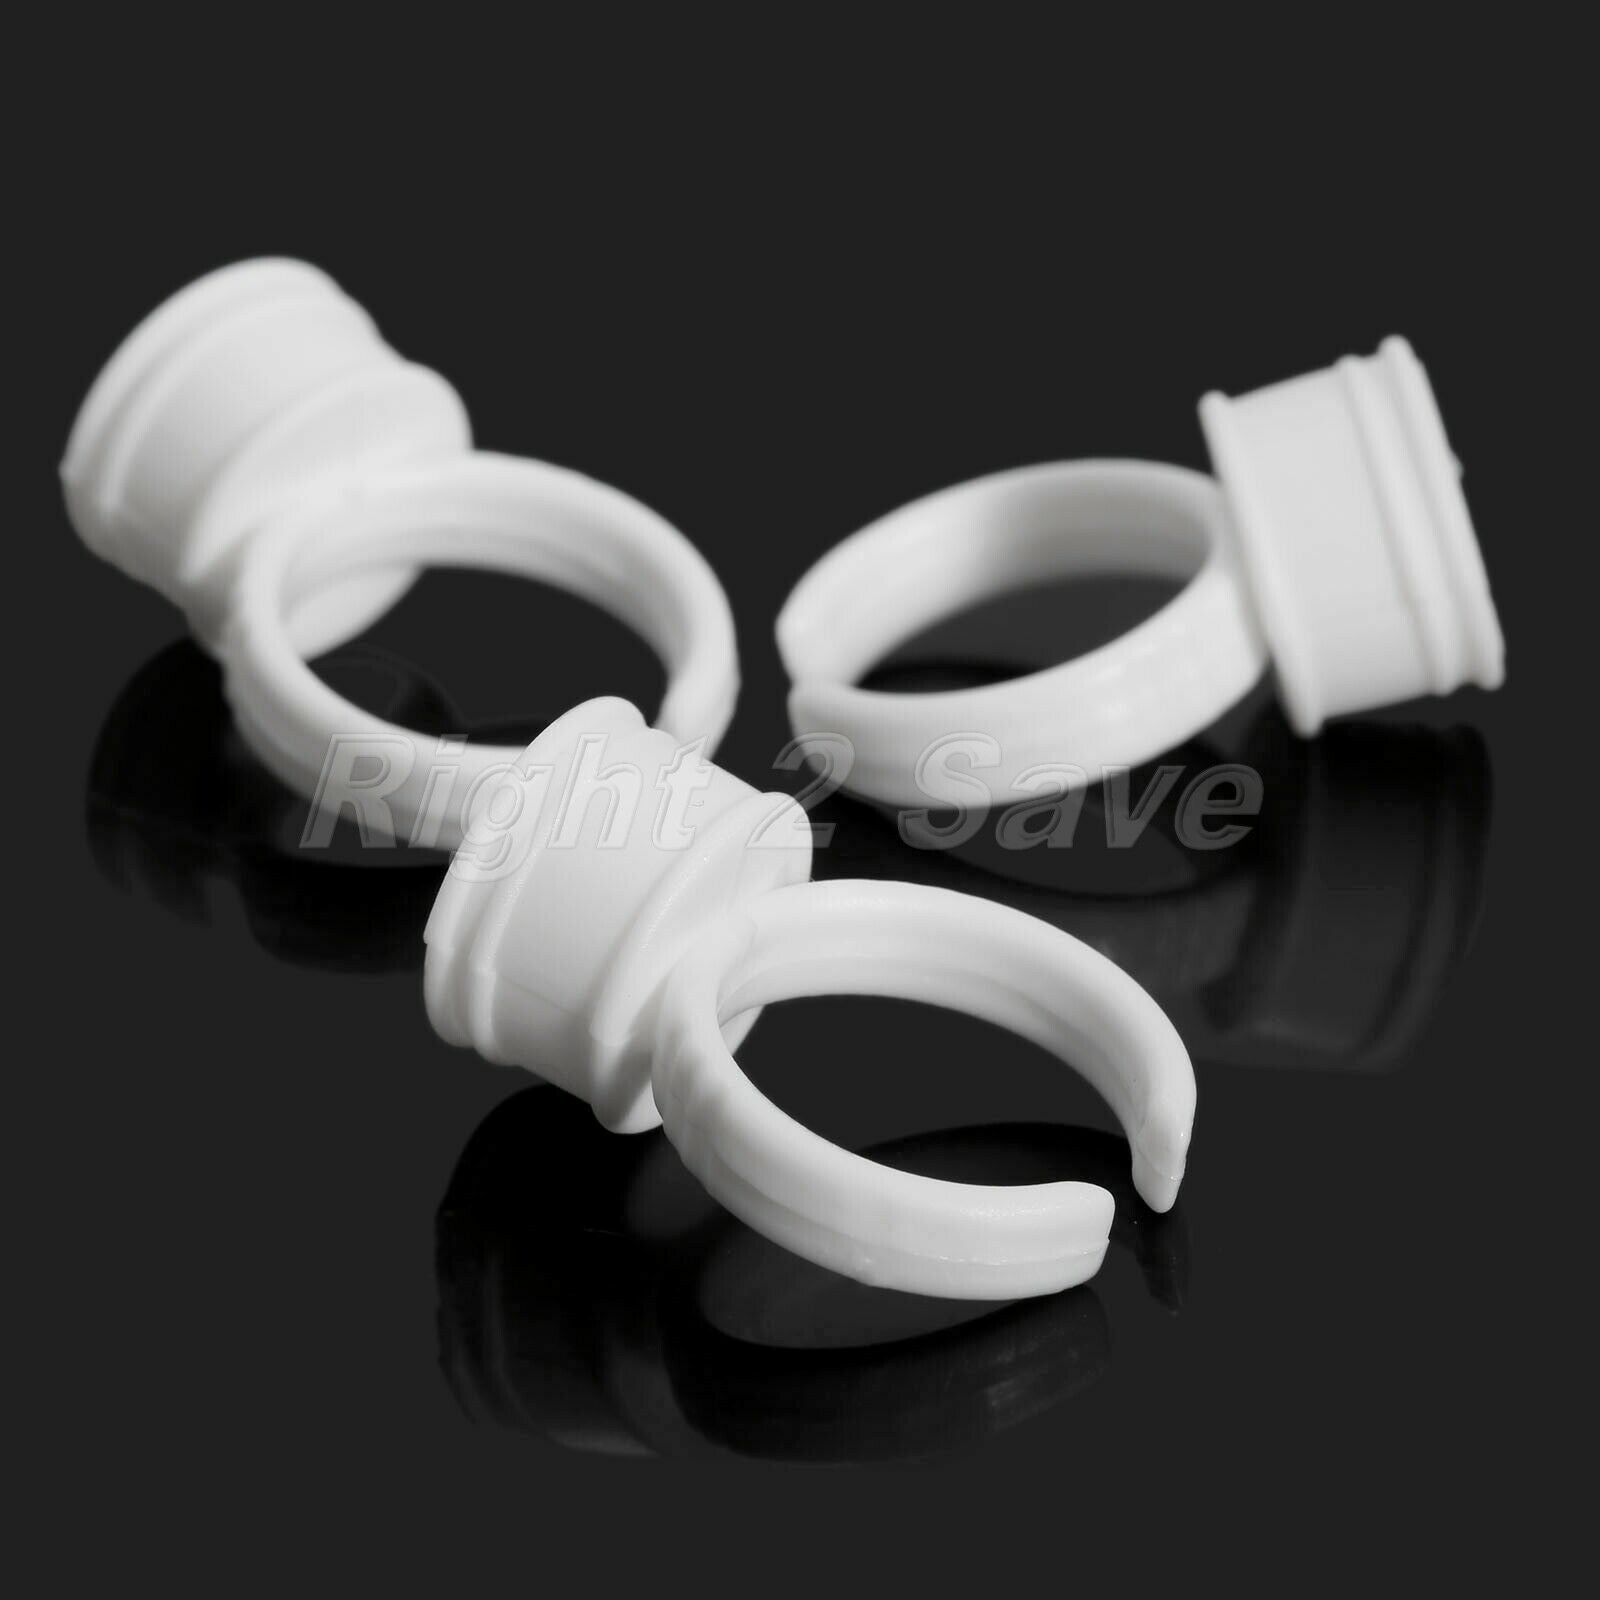 50pcs White Plastic Disposable Tattoo Ink Holder Cups Medium For Tattoo Makeup